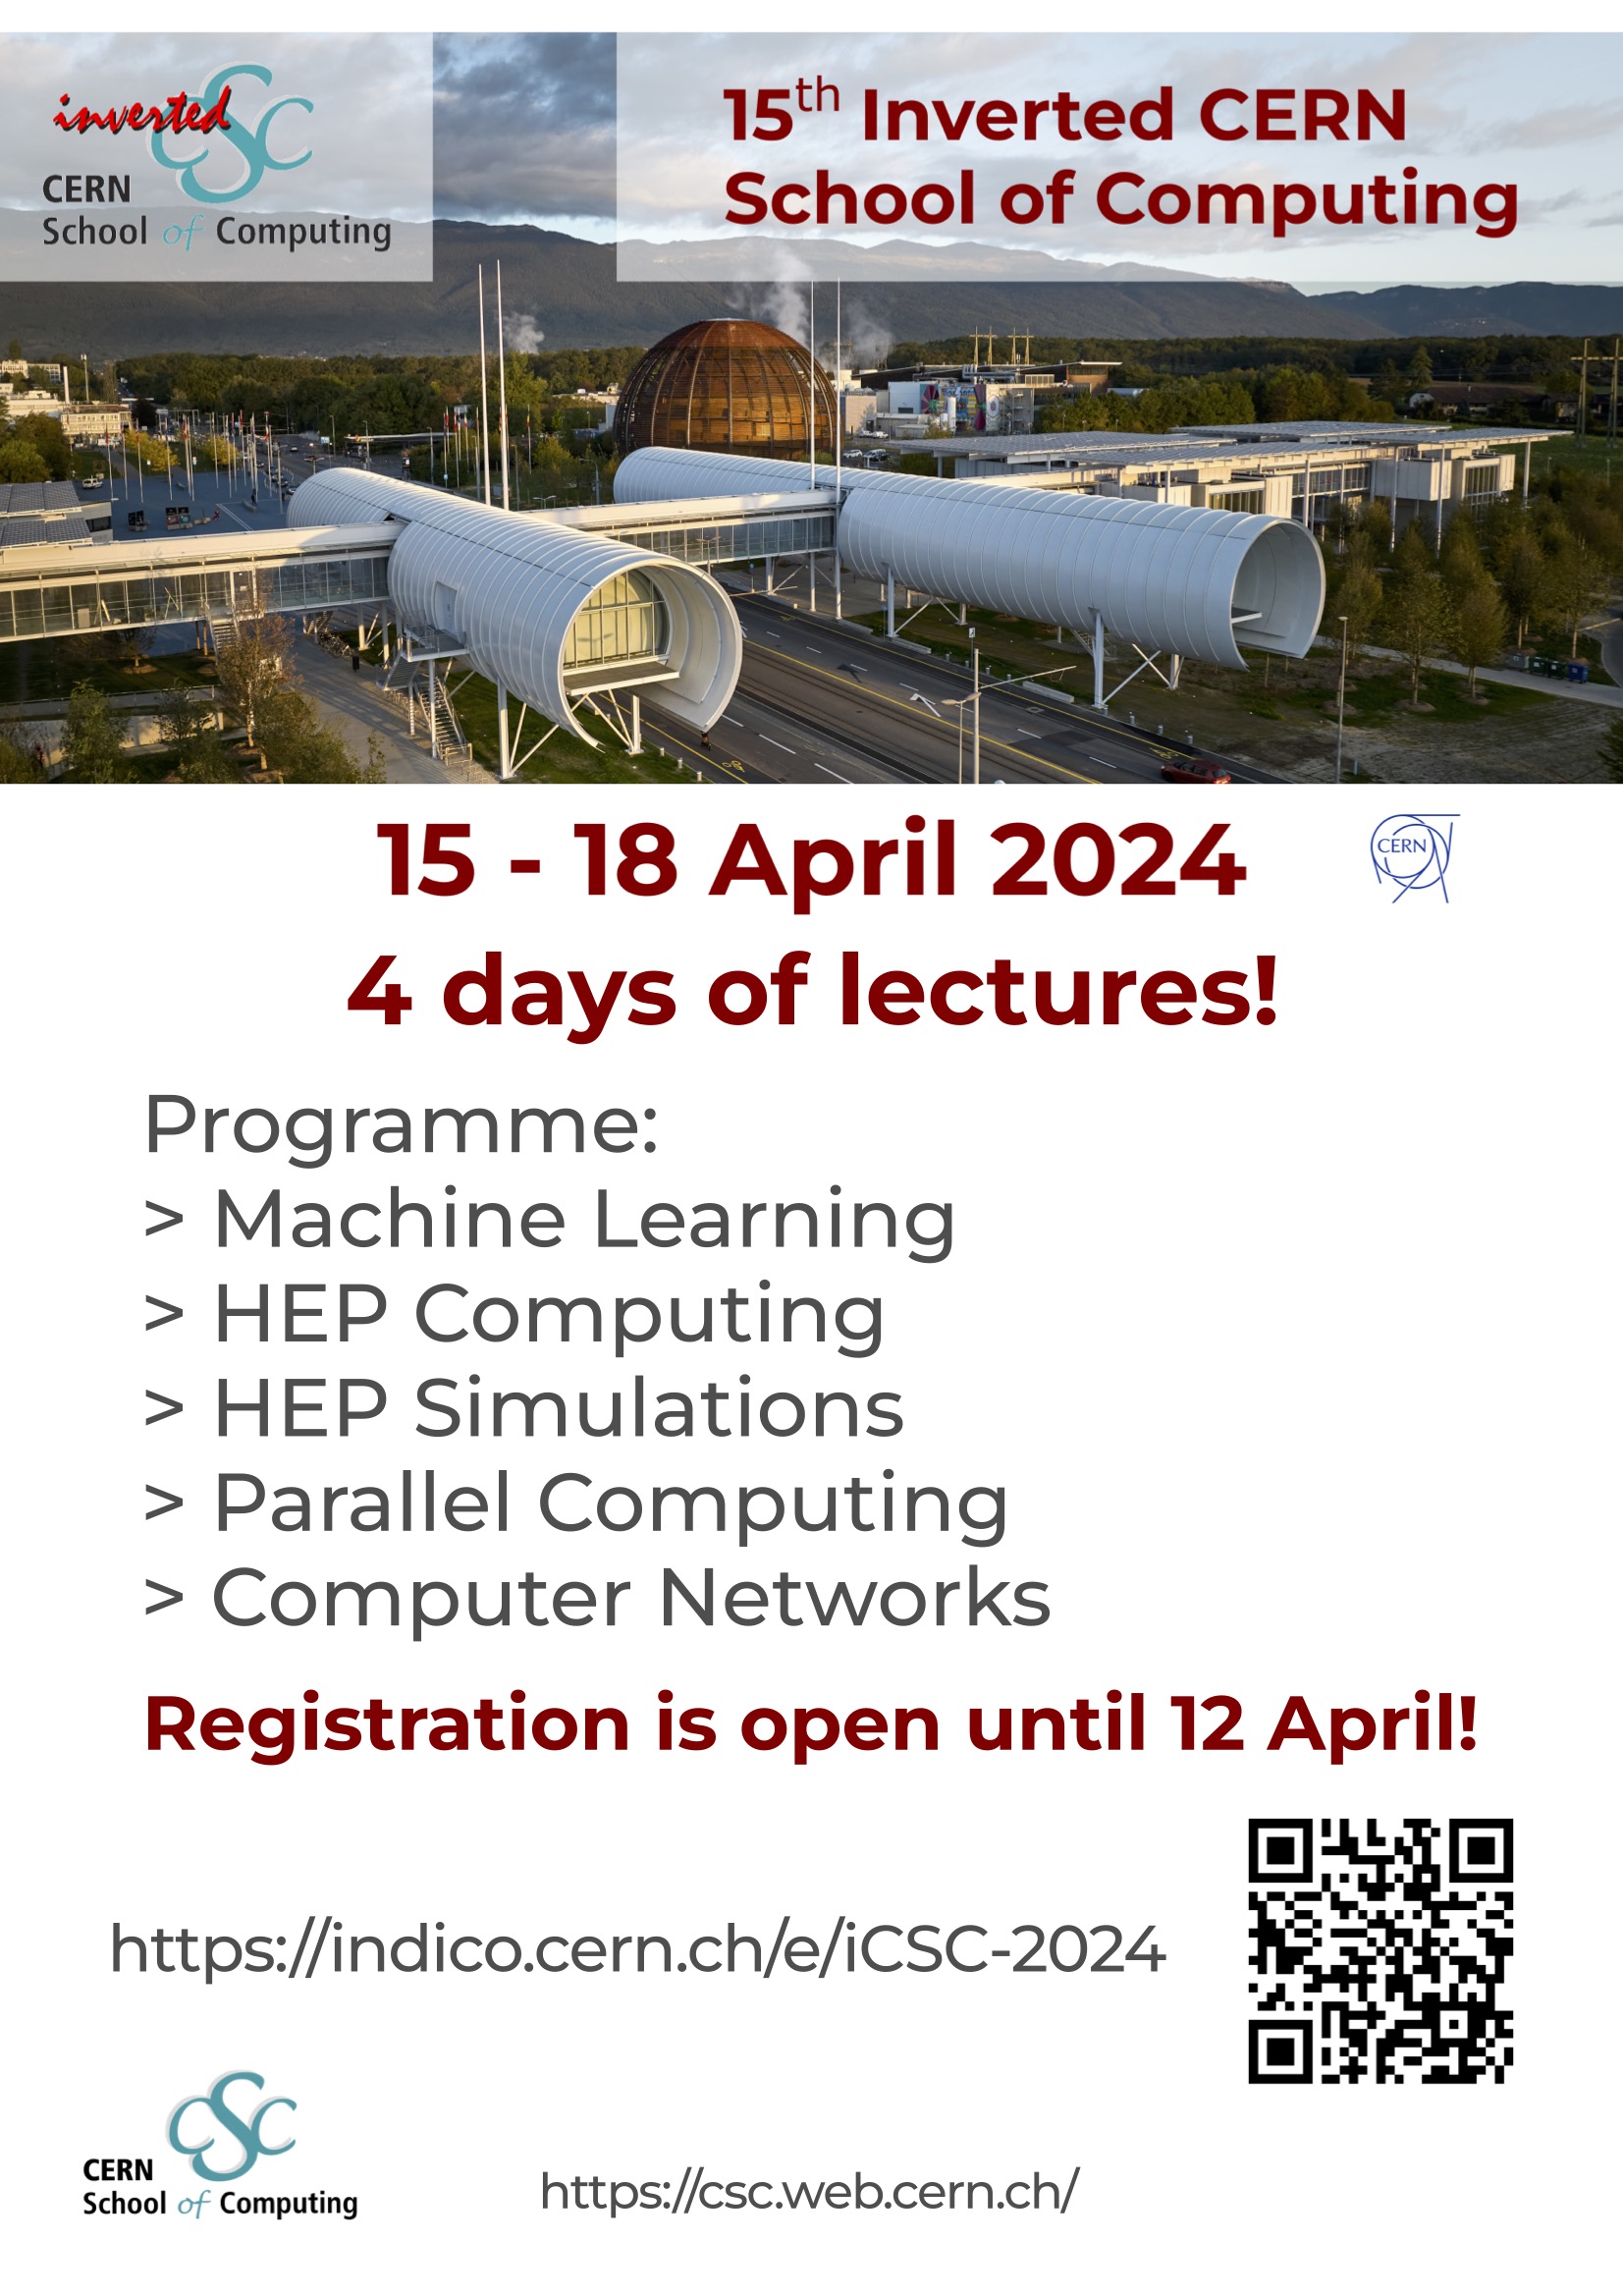 Information about CERN school of computing. Please use the external link for more information